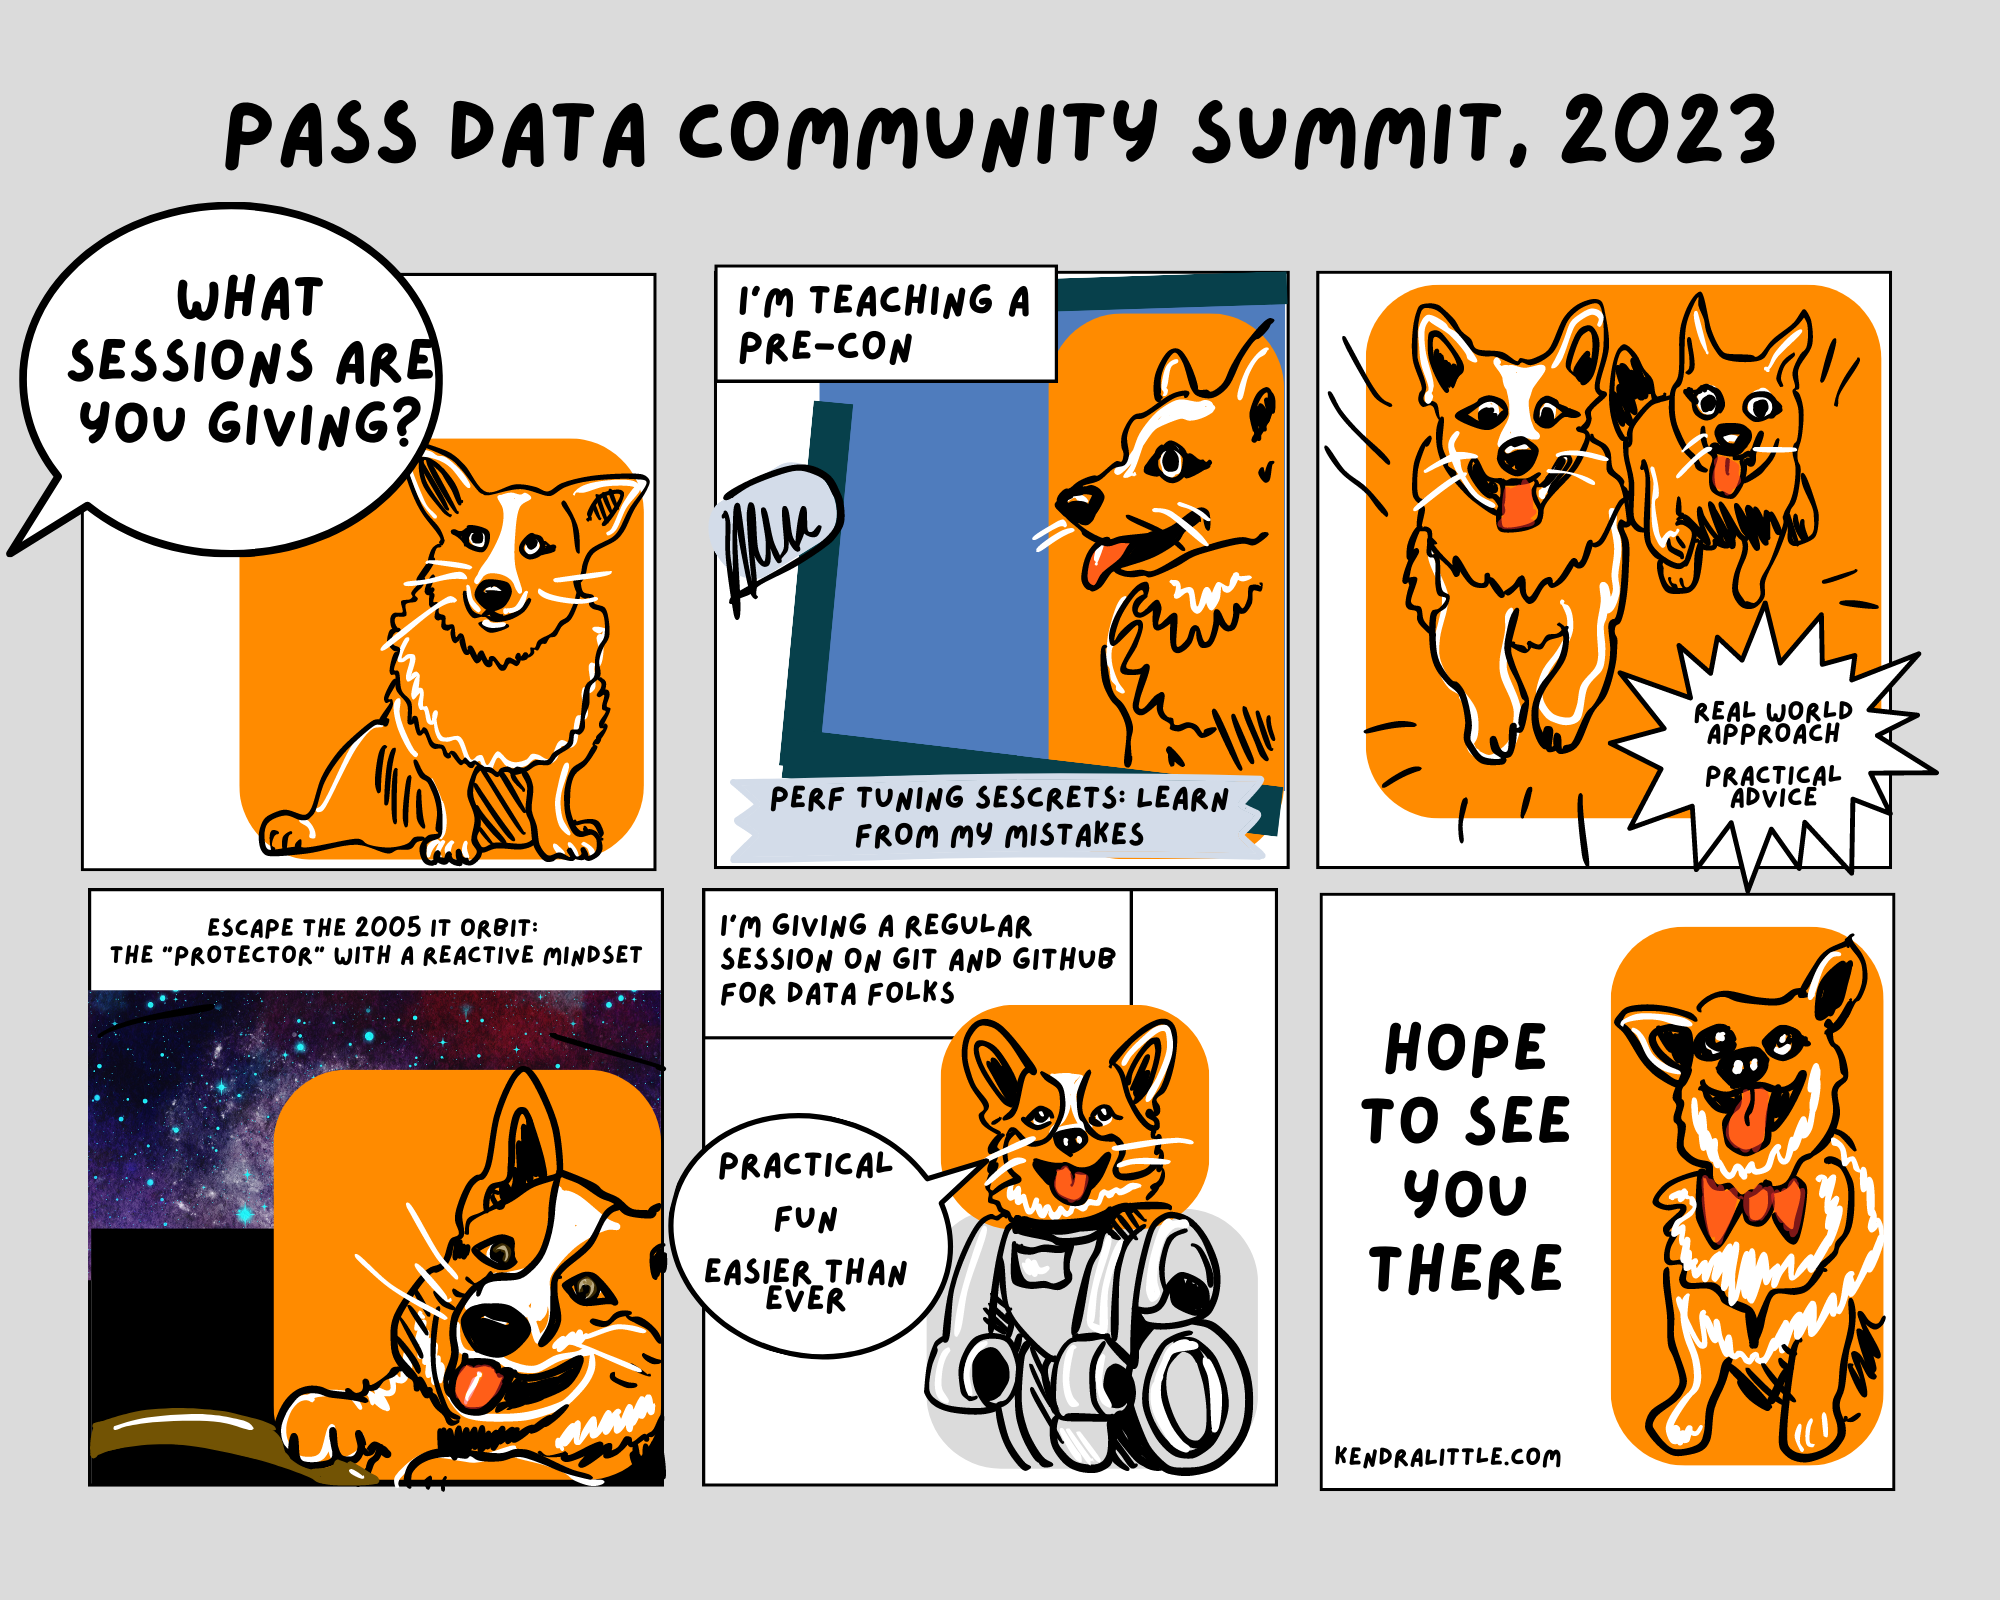 A six panel comic. Panel 1: a question from outside the frame asking a corgi, 'what sessions are you giving?'. Panel 2: The corgi at a microphone with the message that I'm giving a precon, Perf Tuning Secrets, Learn from my mistakes. Panel 3: two corgis running with an explosion labeled 'real world approach, practical advice'. Panel 4: a corgi who may be driving in a spaceship with the label, 'escape the 2005 IT orbit: the protector with a reactive mindset'. Panel 5: a corgi with a futuristic robot body saying that the regular session is on Git, and it's practical, fun, easier than ever. Panel 6: a dorky smiling corgi with the message 'hope to see you there'.